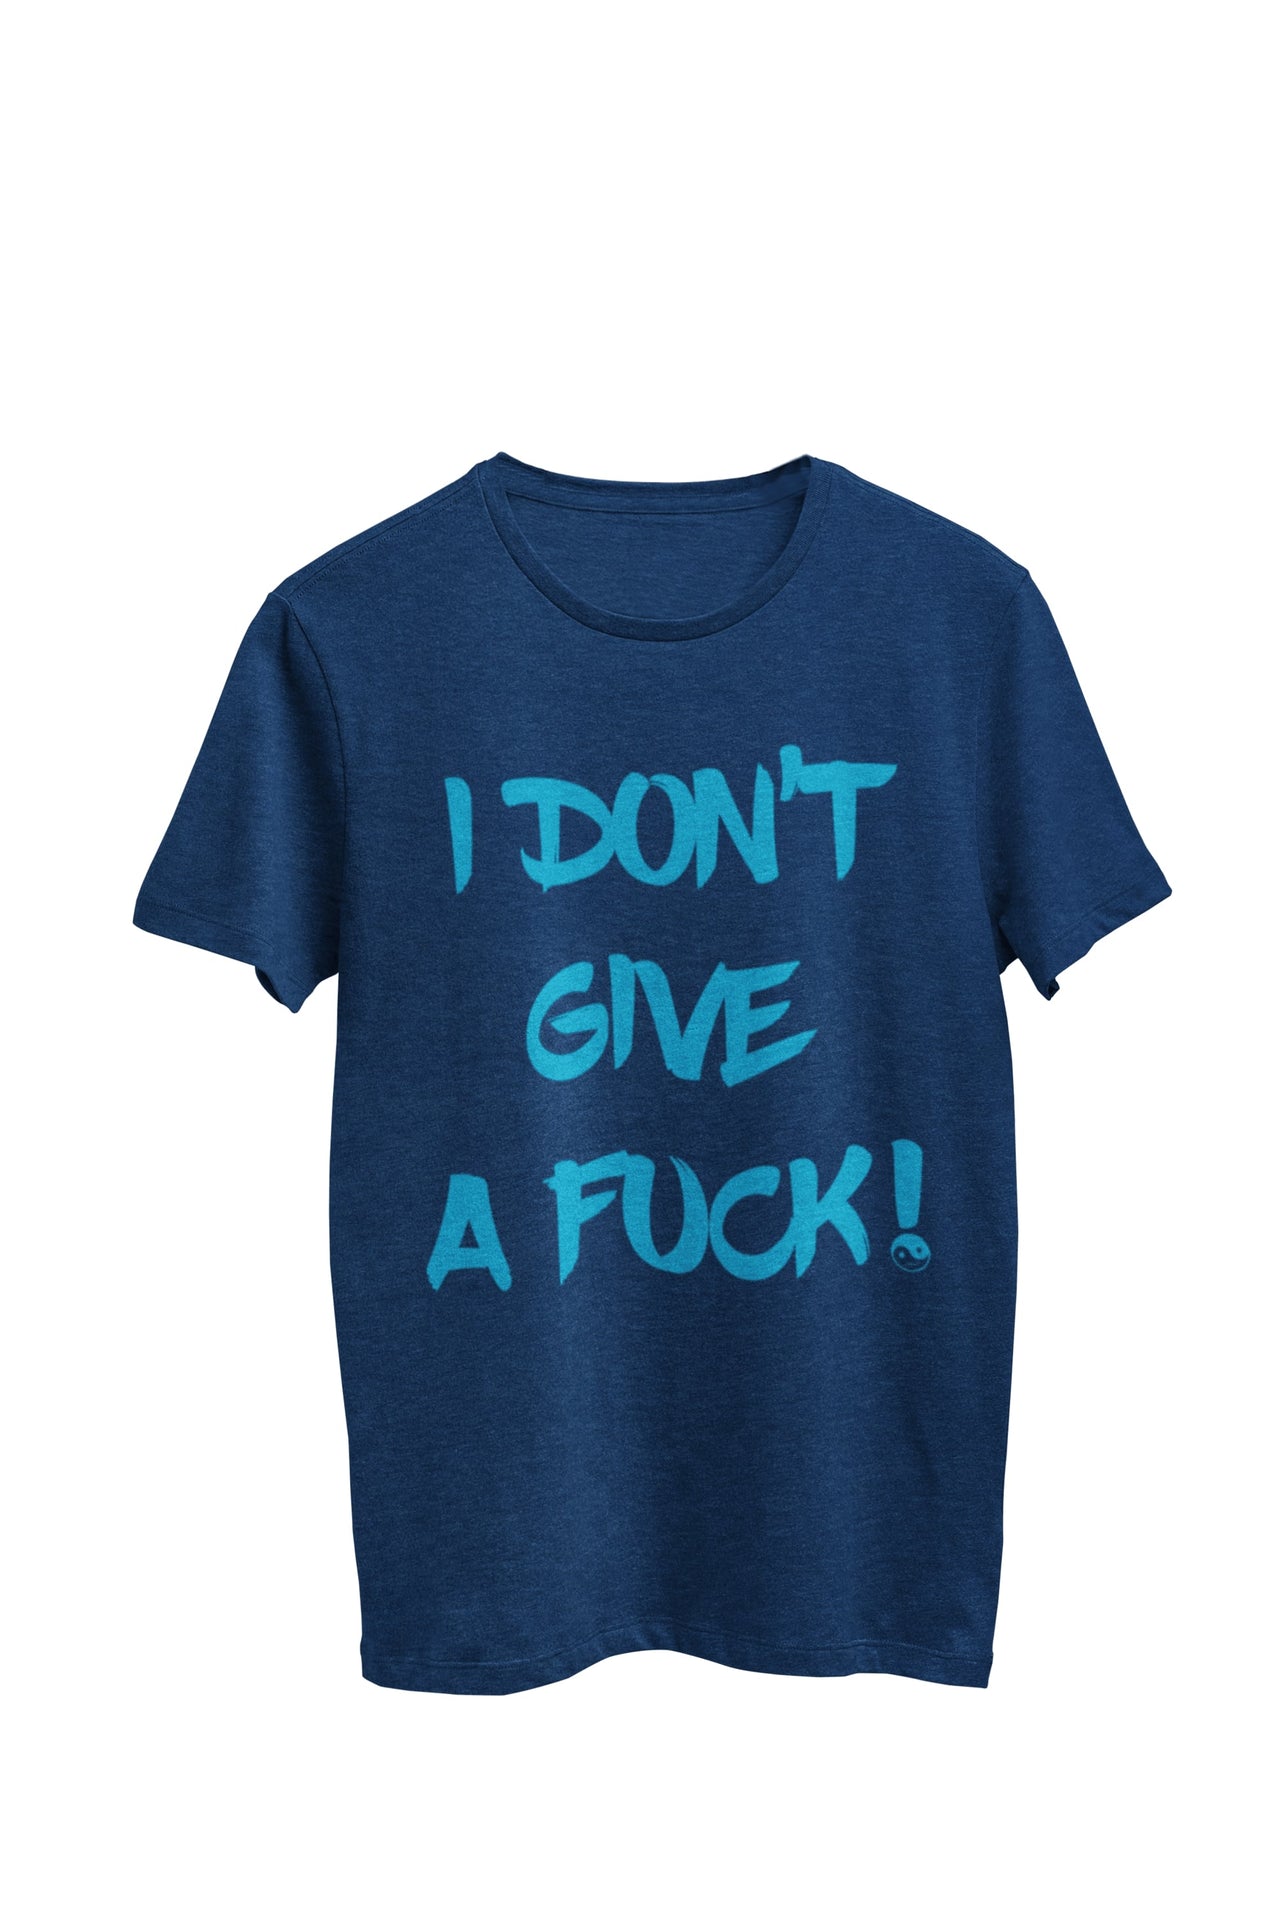 Navy Heather Unisex T-shirt featuring the bold statement 'I don't give a fuck'. Designed by WooHoo Apparel